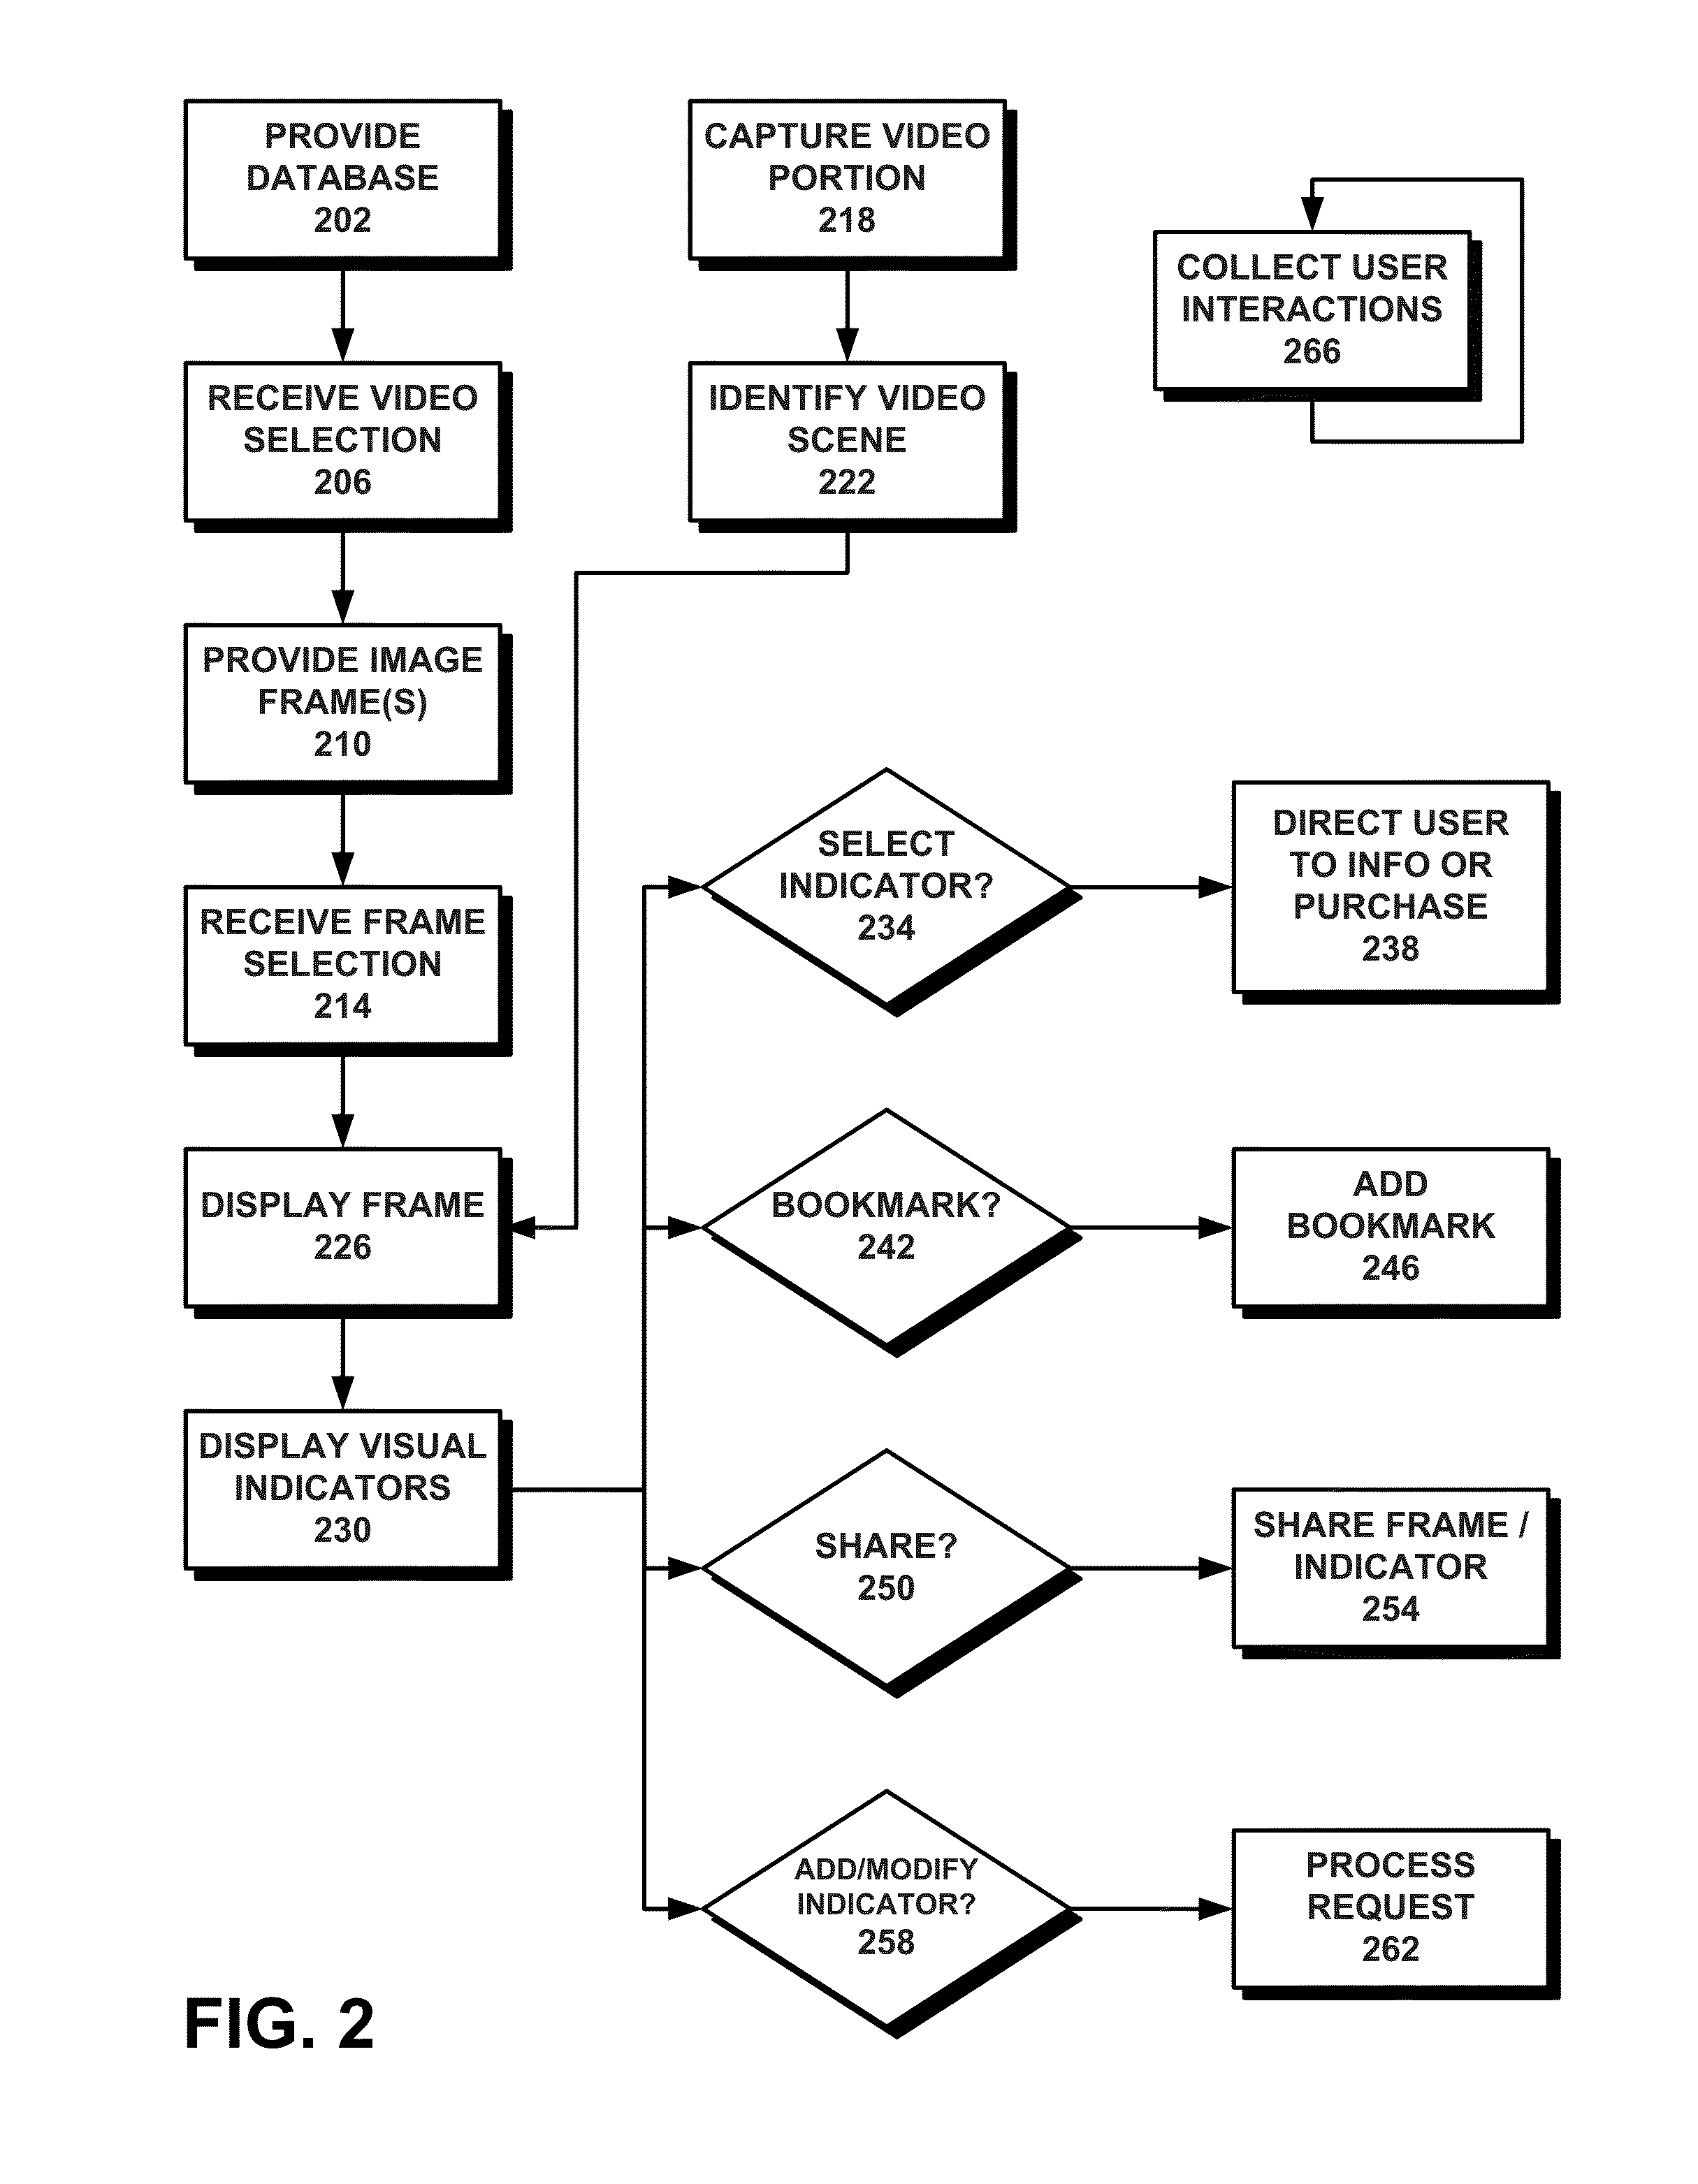 Systems and methods for identifying, interacting with, and purchasing items of interest in a video